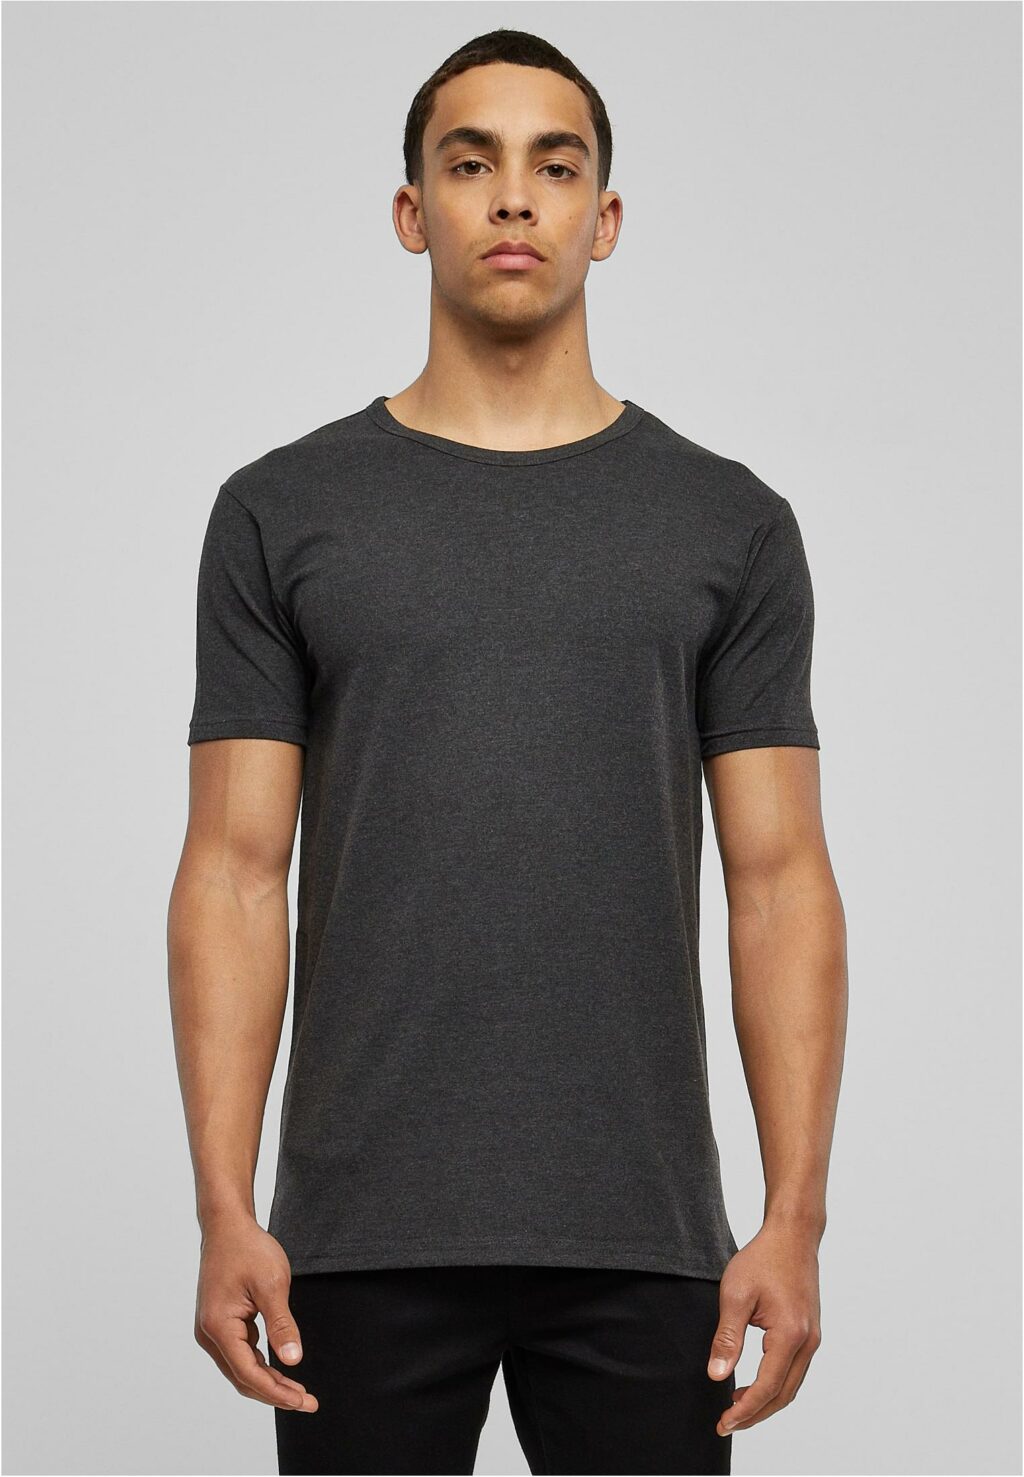 Urban Classics Fitted Stretch Tee charcoal TB814